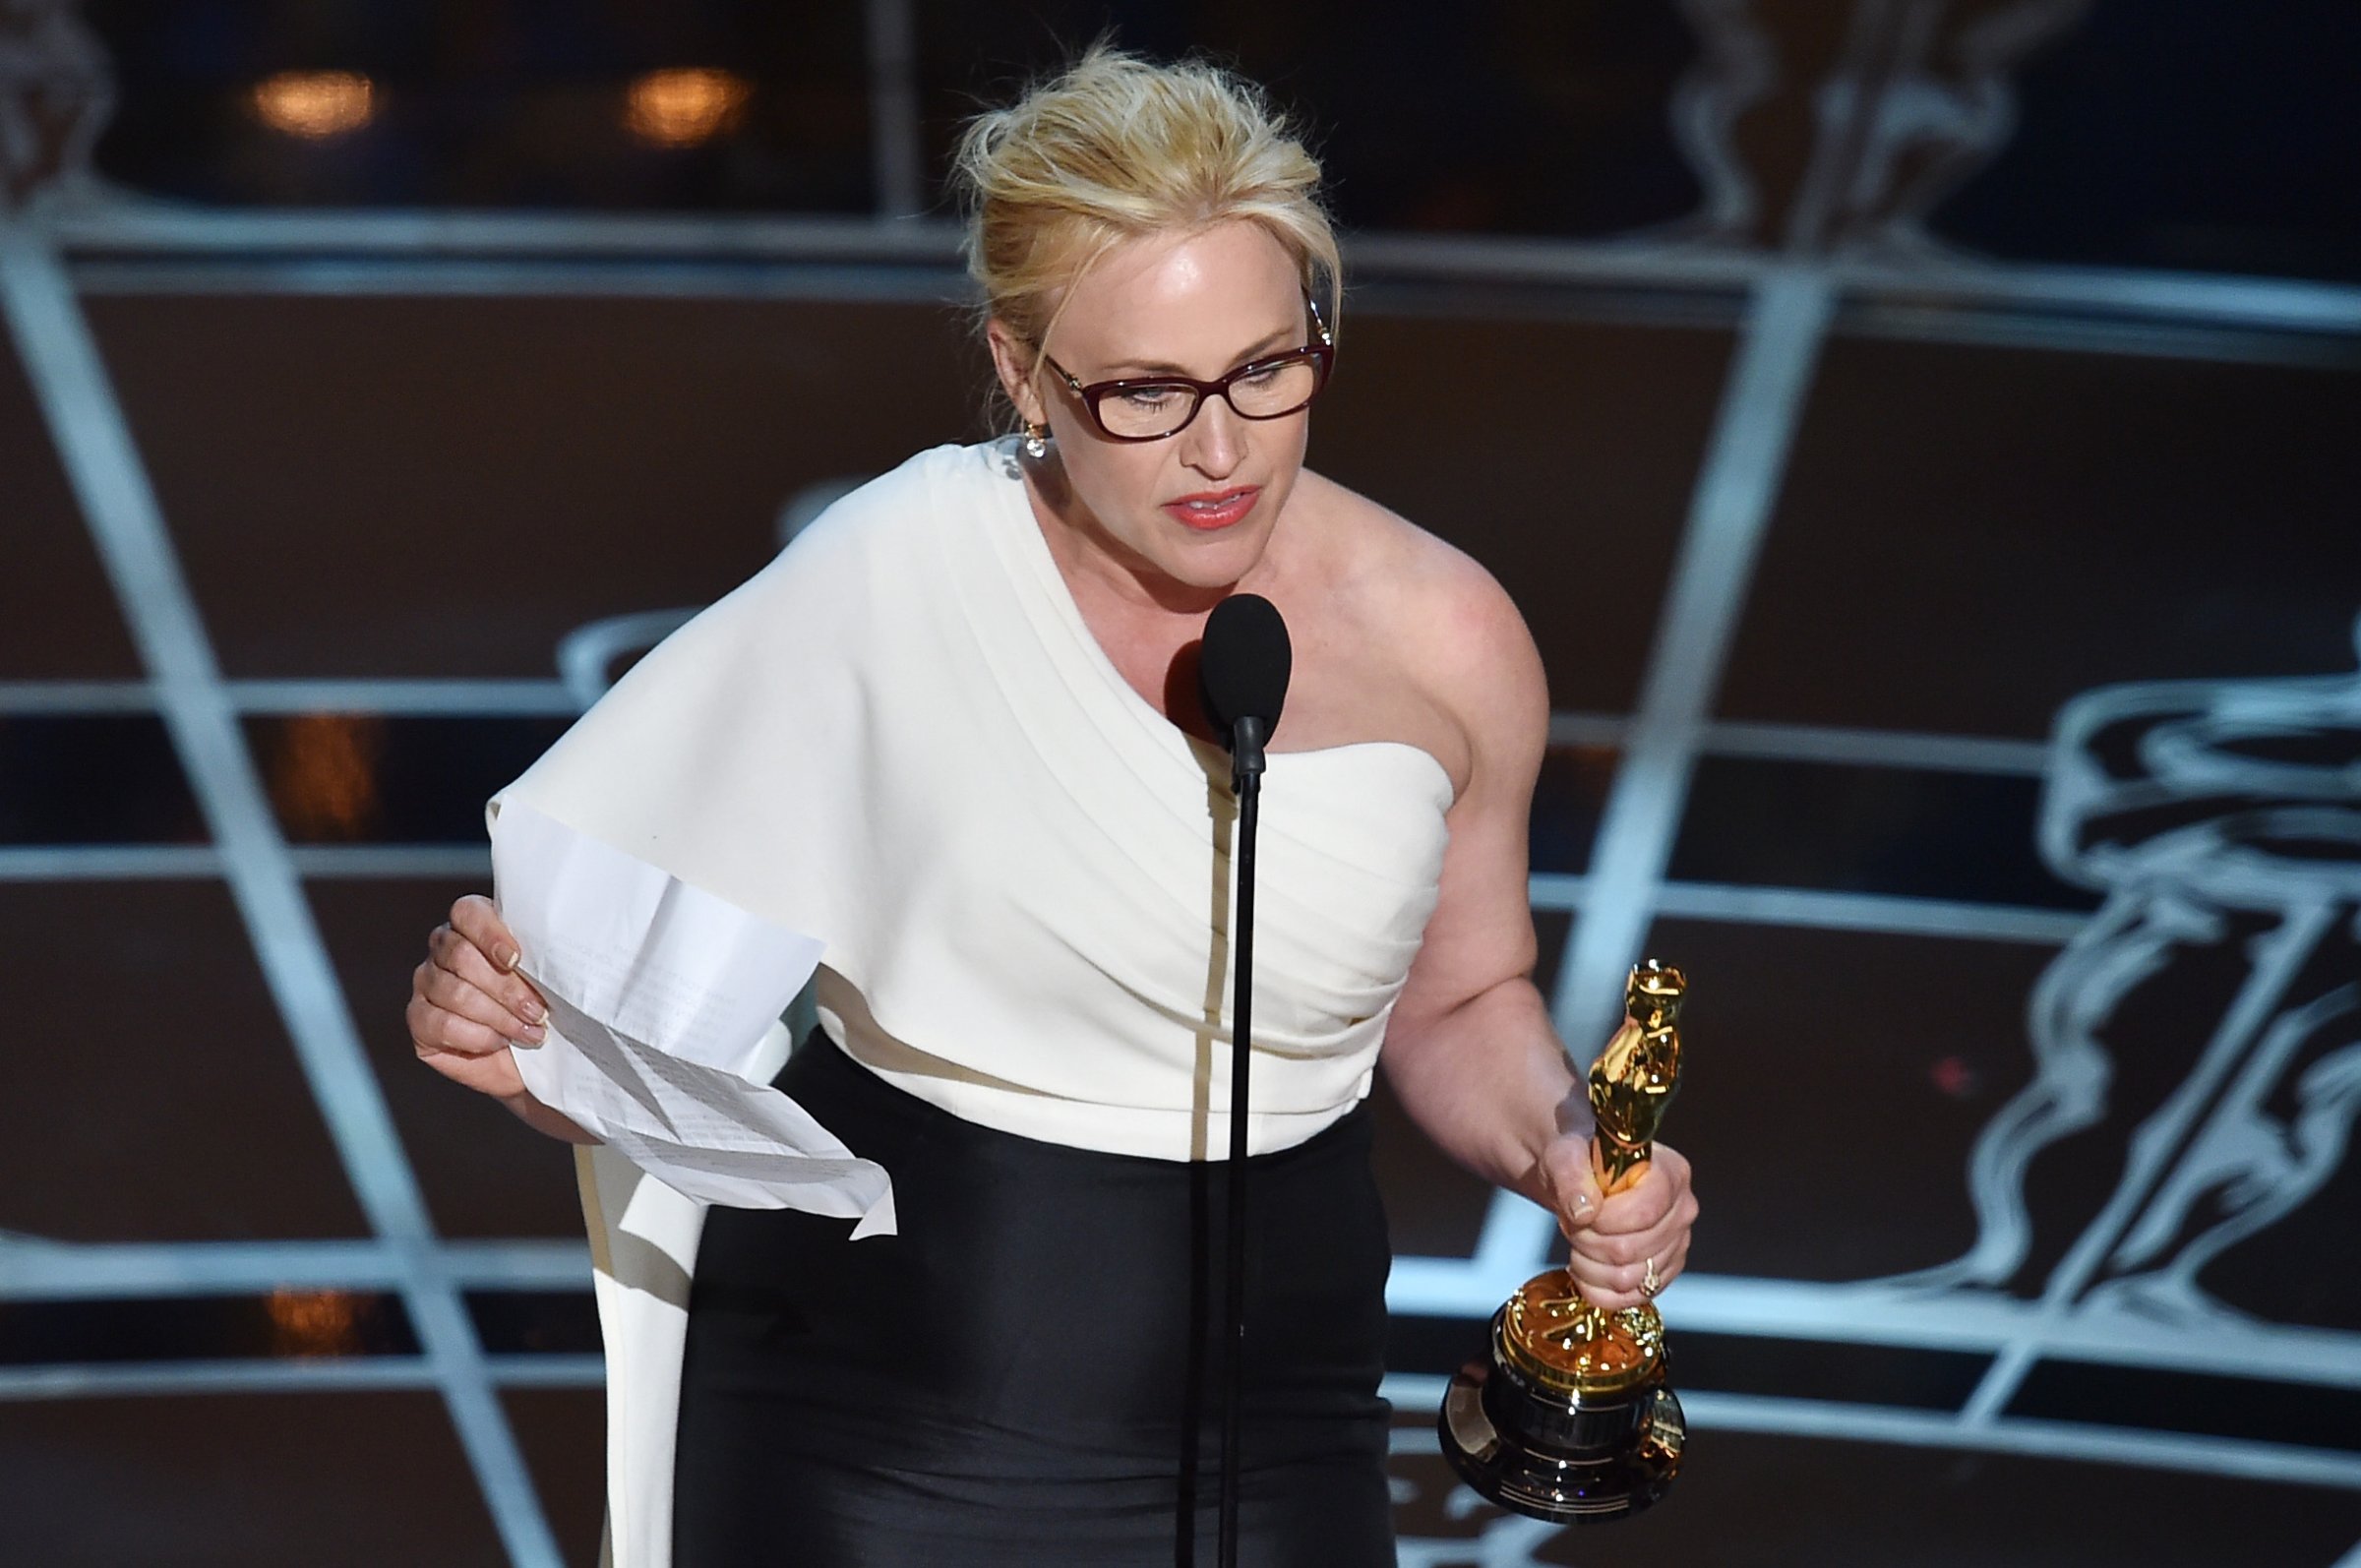 Patricia Arquette accepts the award for Best Actress in a Supporting Role for 'Boyhood' during the 87th Annual Academy Awards on February 22, 2015 in Hollywood, California.